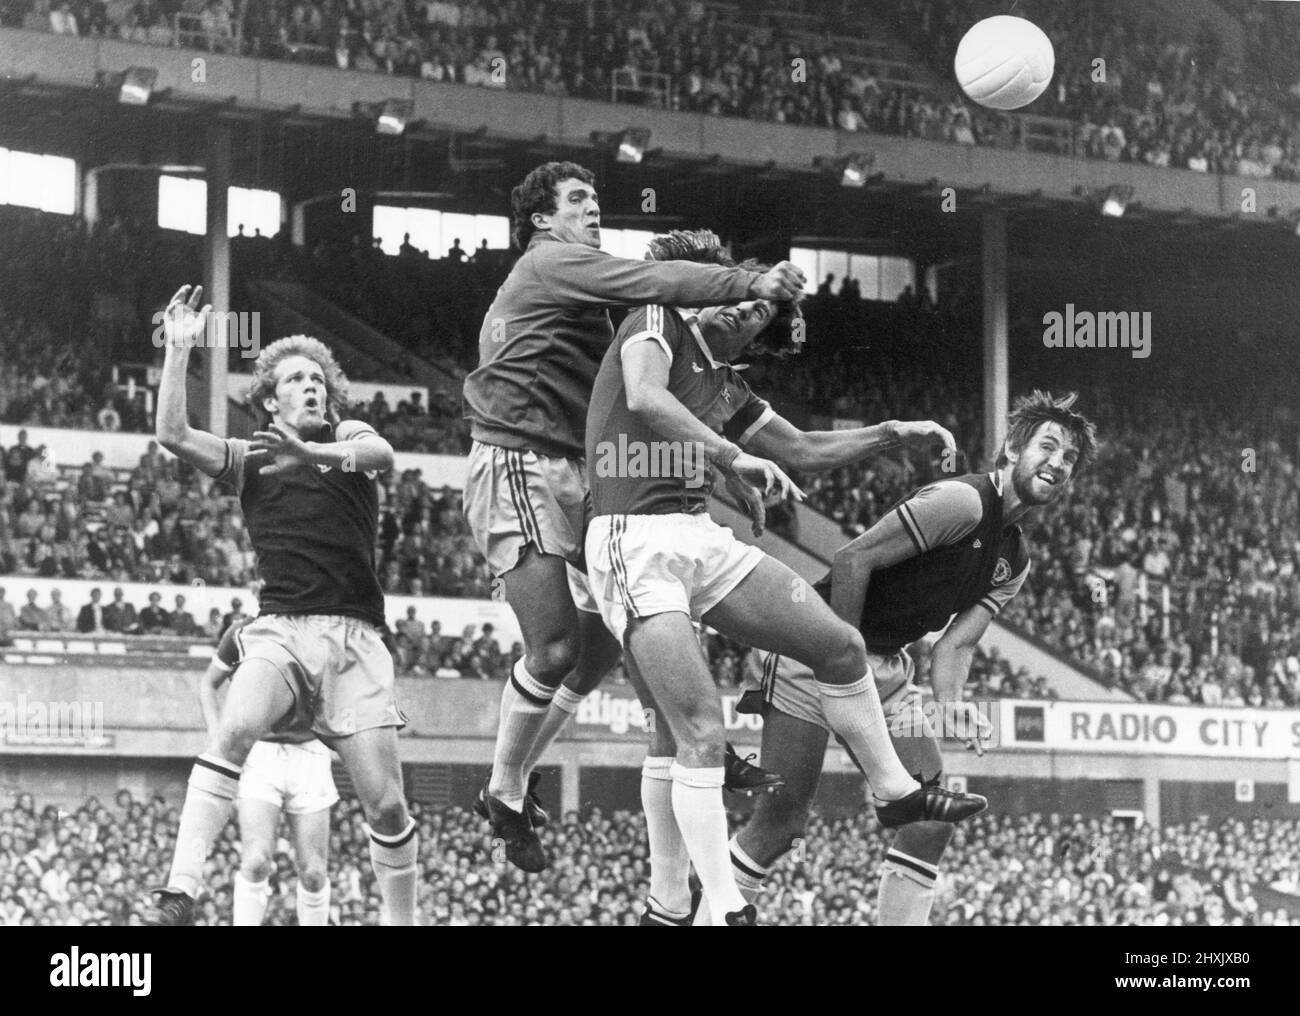 English League Division One match at Goodison Park. Everton 0 v Aston Villa 2. Villa goalkeeper John Burridge punches the ball clear from the challenge of Mick Lyons as Vill players Andy Gray (left) and Chris Nicholl look on. 28th August 1976. Stock Photo